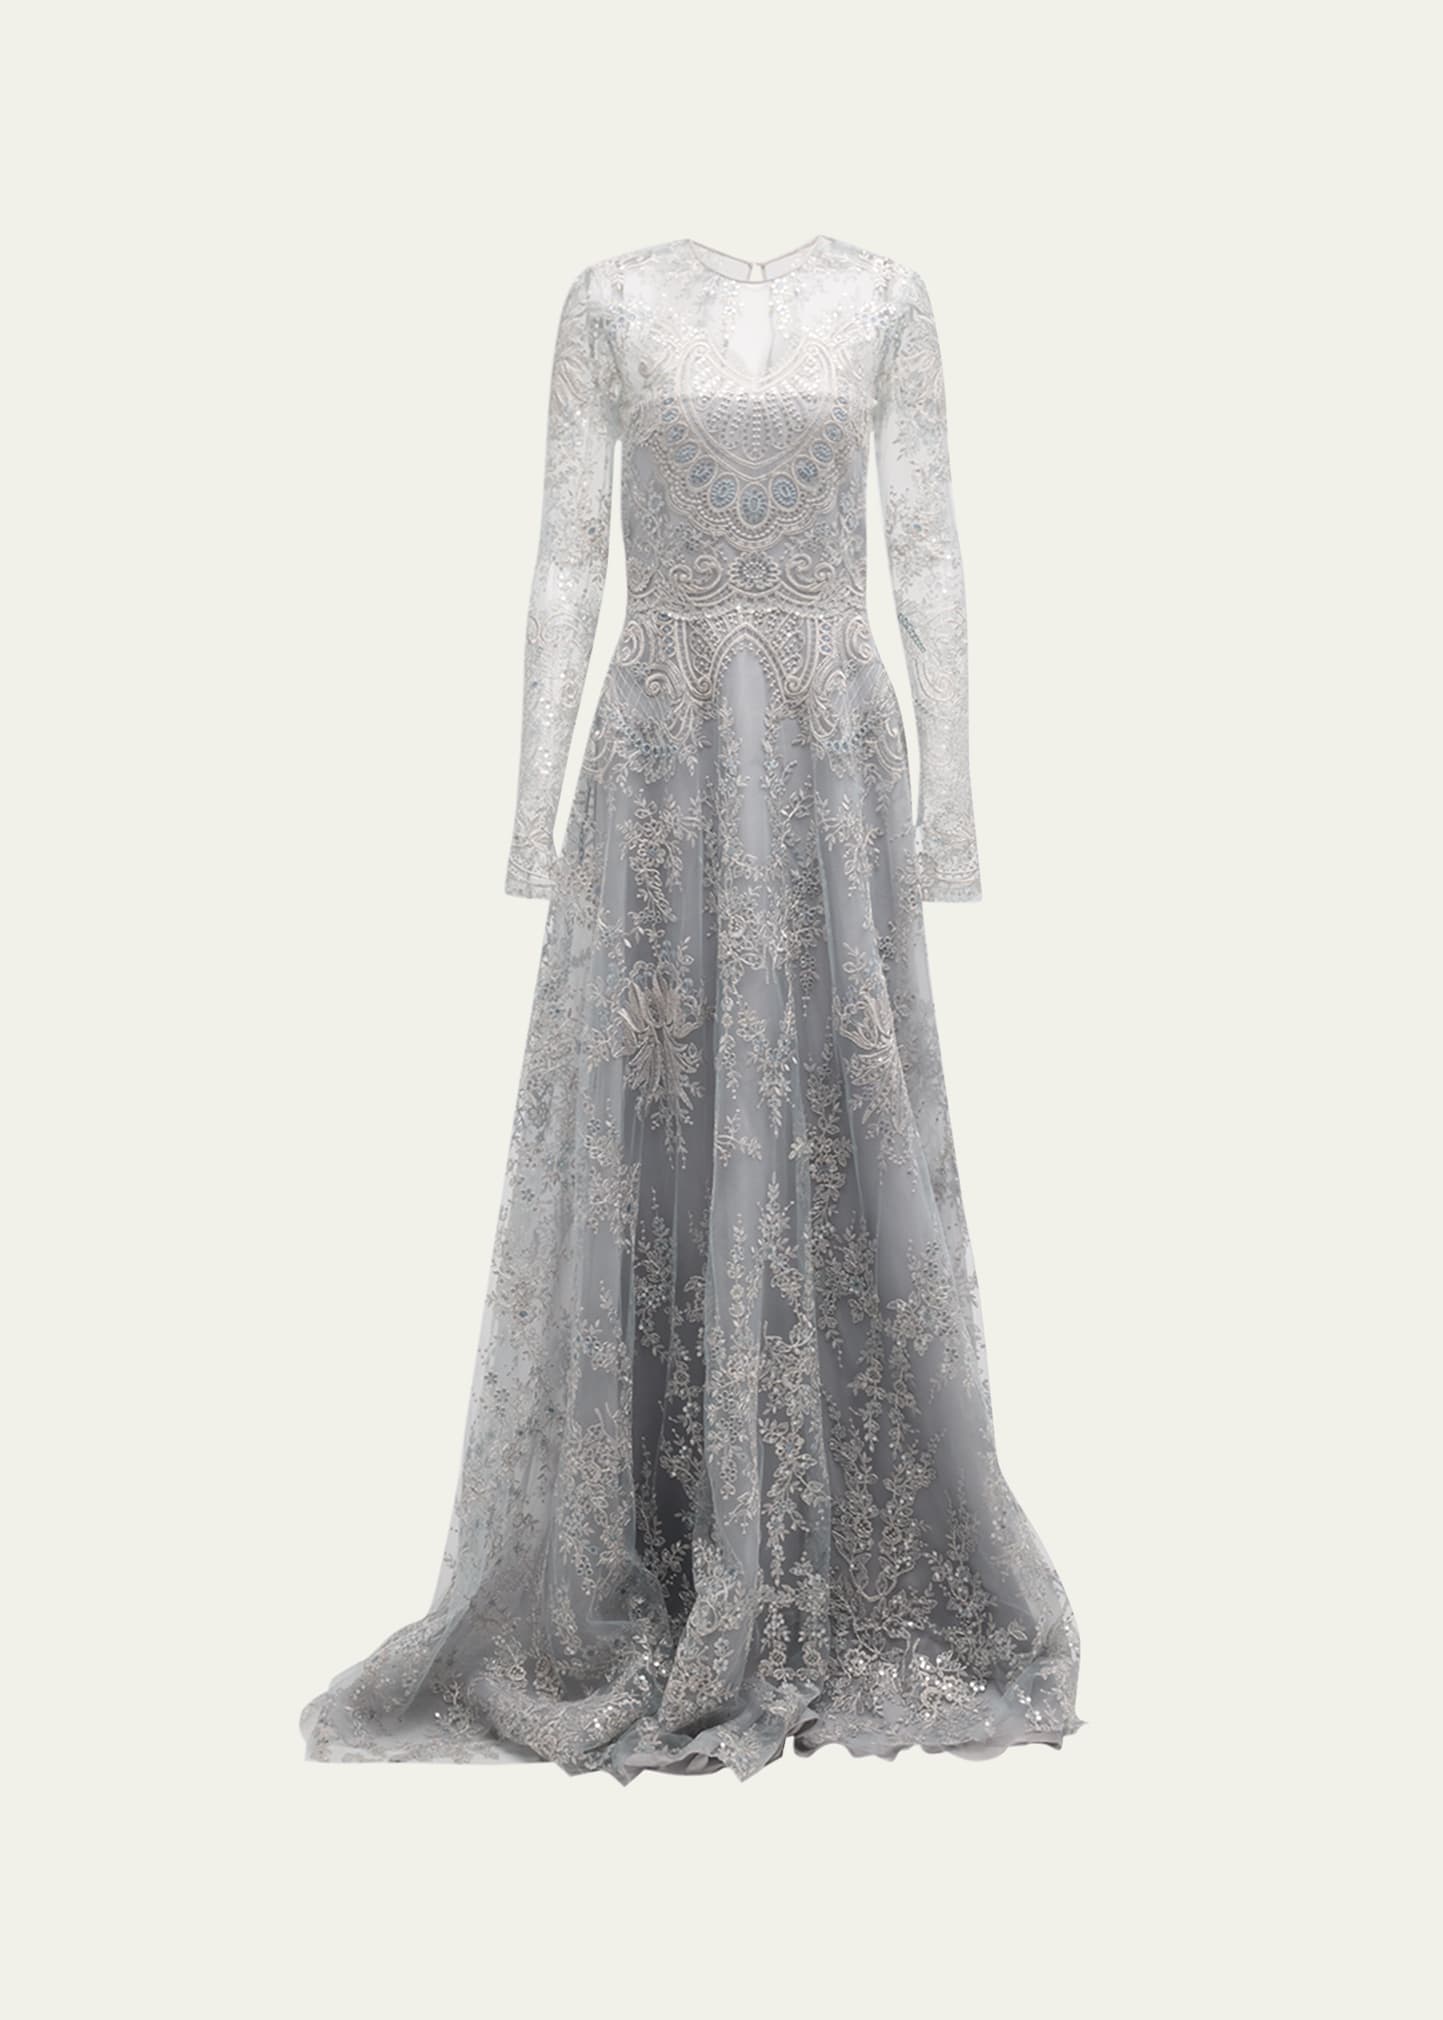 Naeem Khan Tattoo Lace Gown With Sheer Overlay In Blue